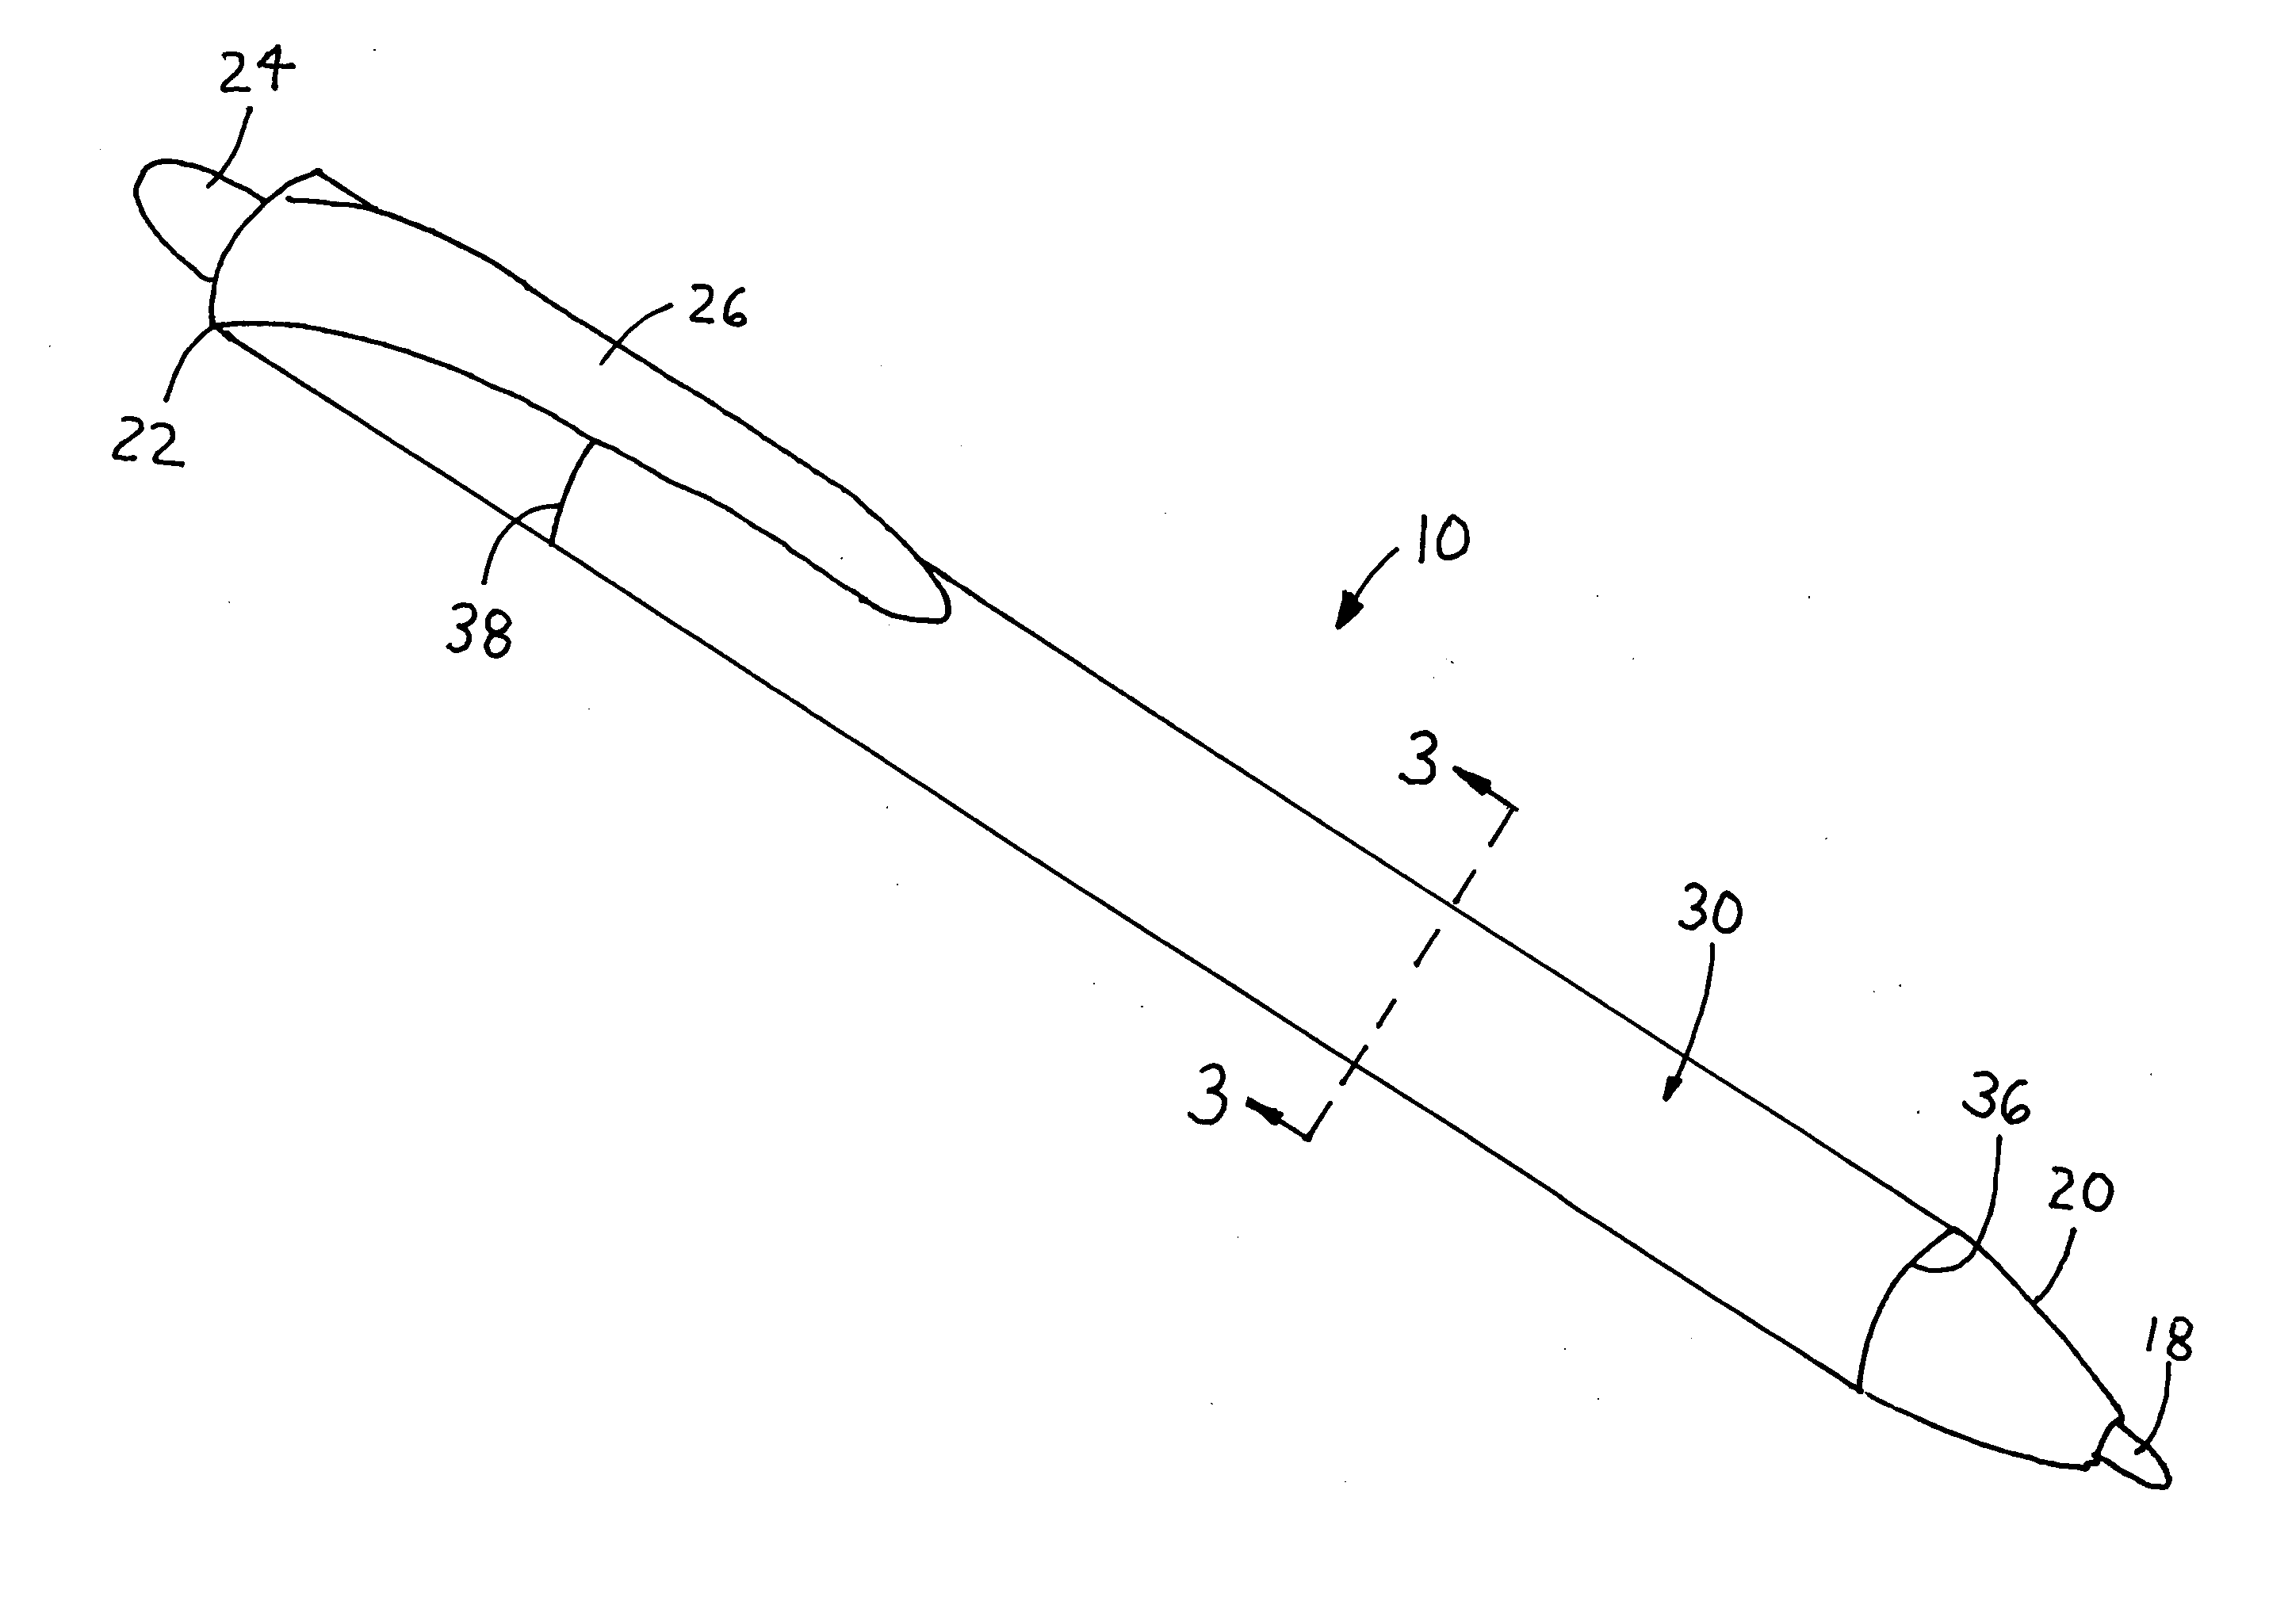 Deformable grip for a writing implement